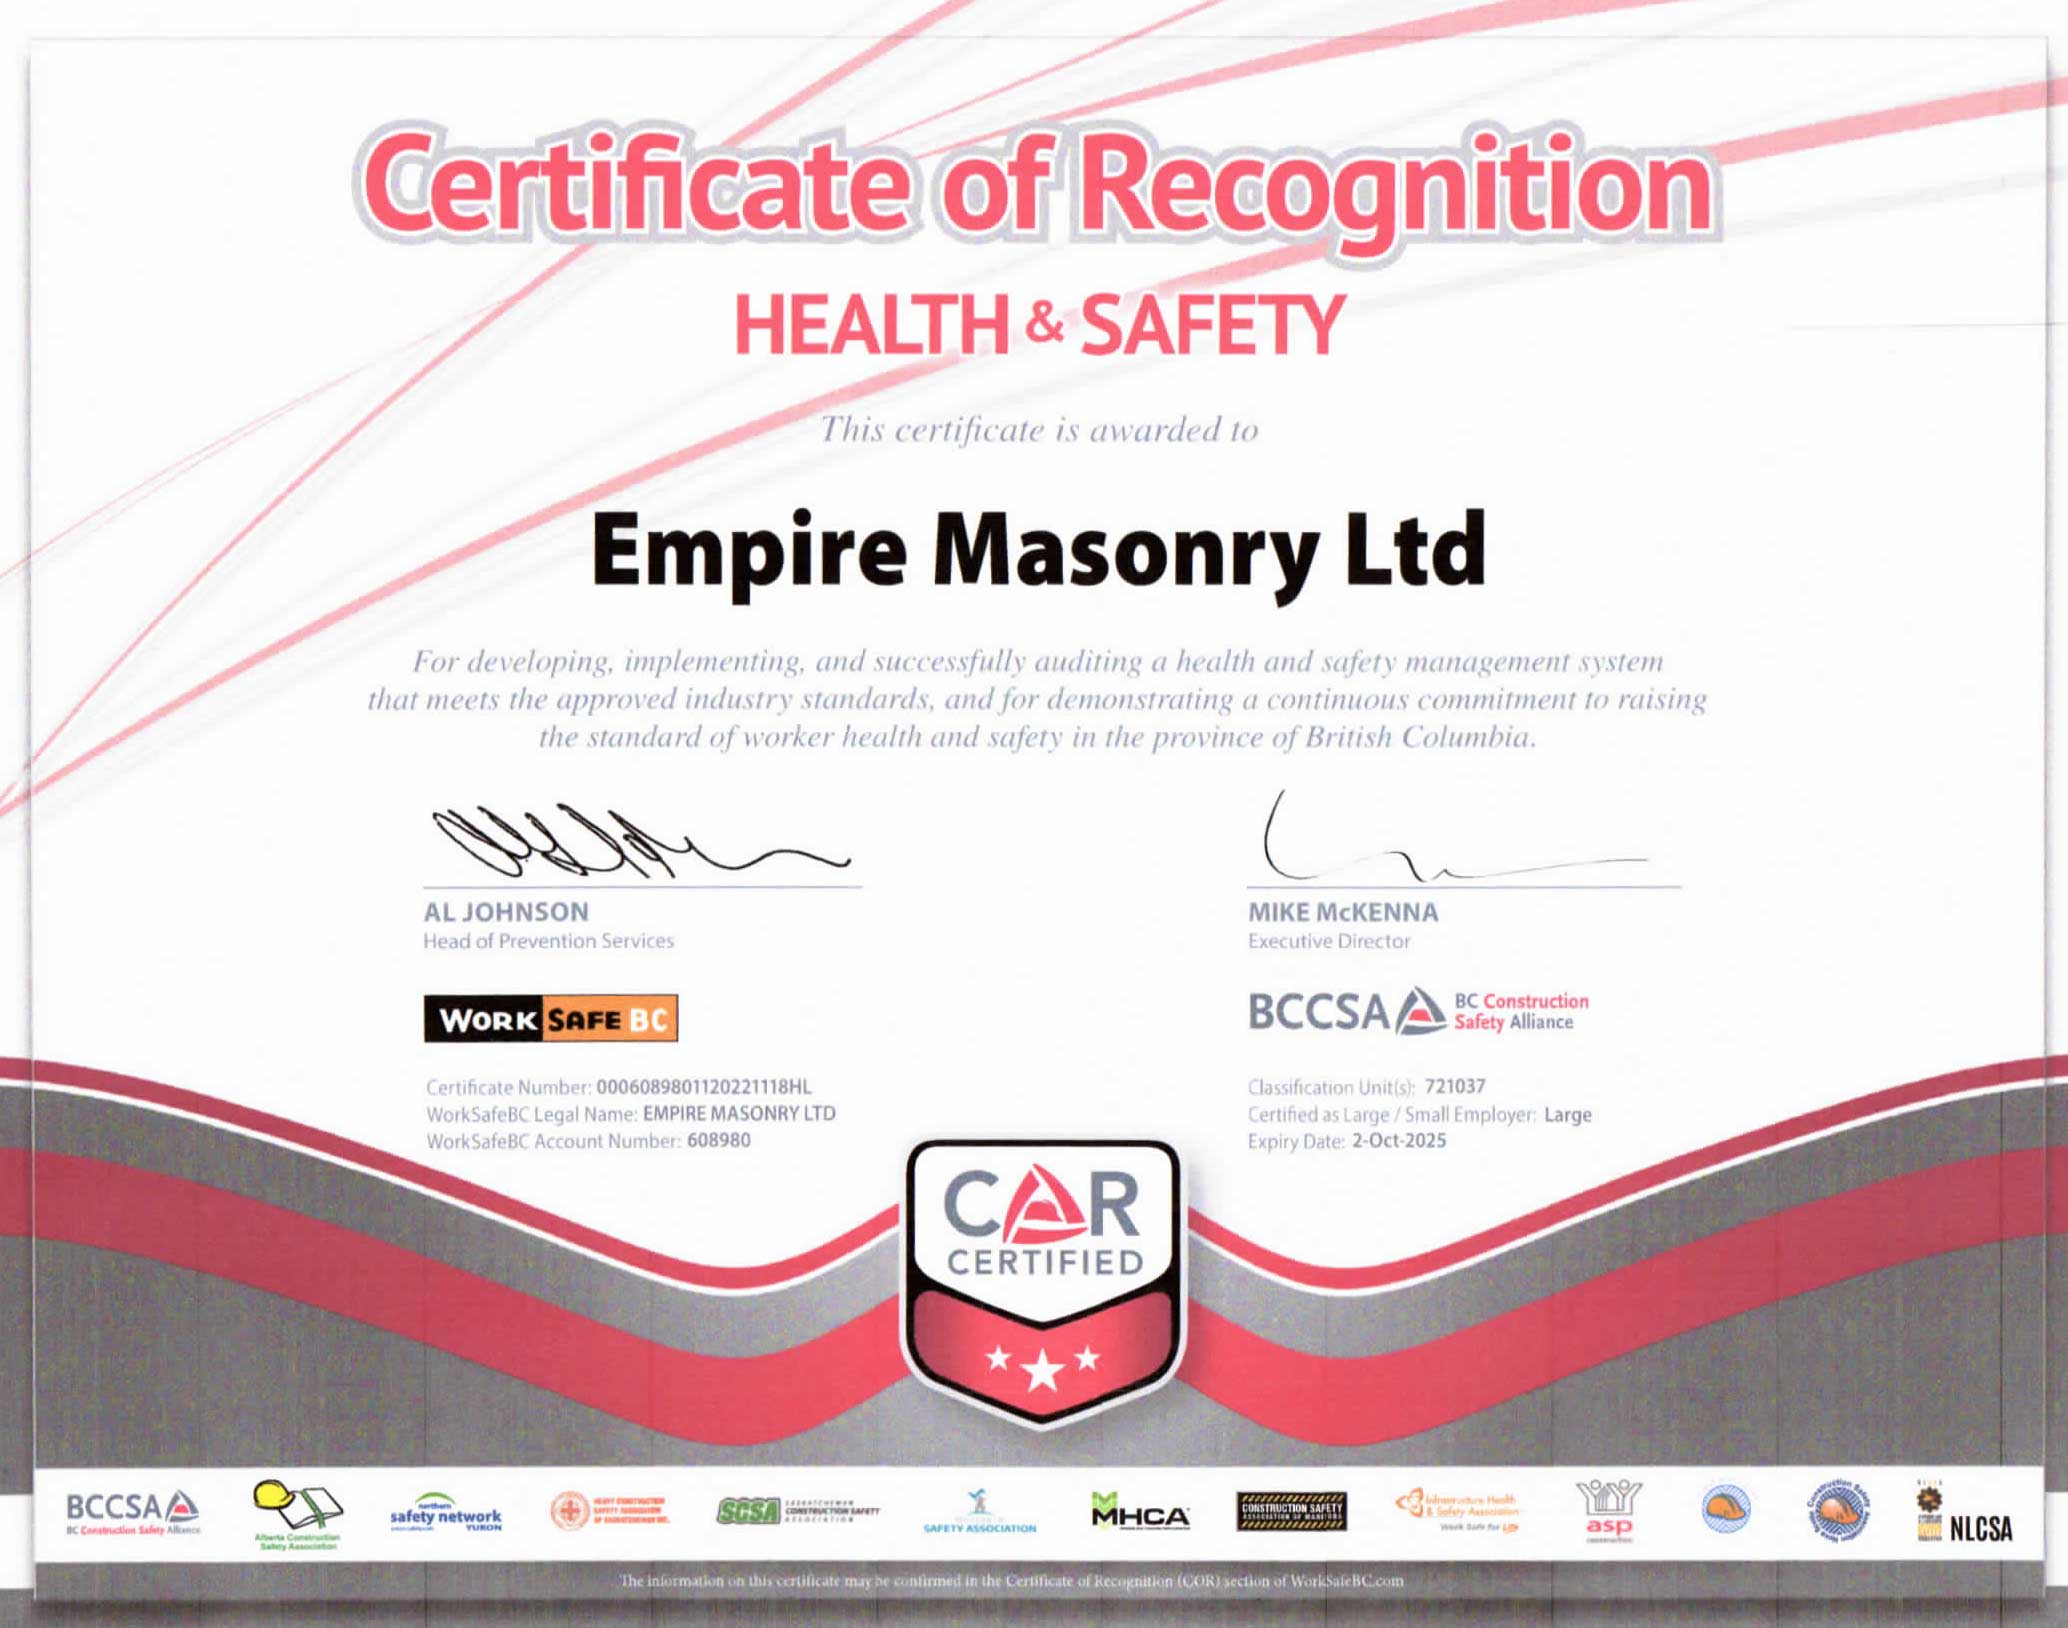 empire masonry certificate recognition health and safety